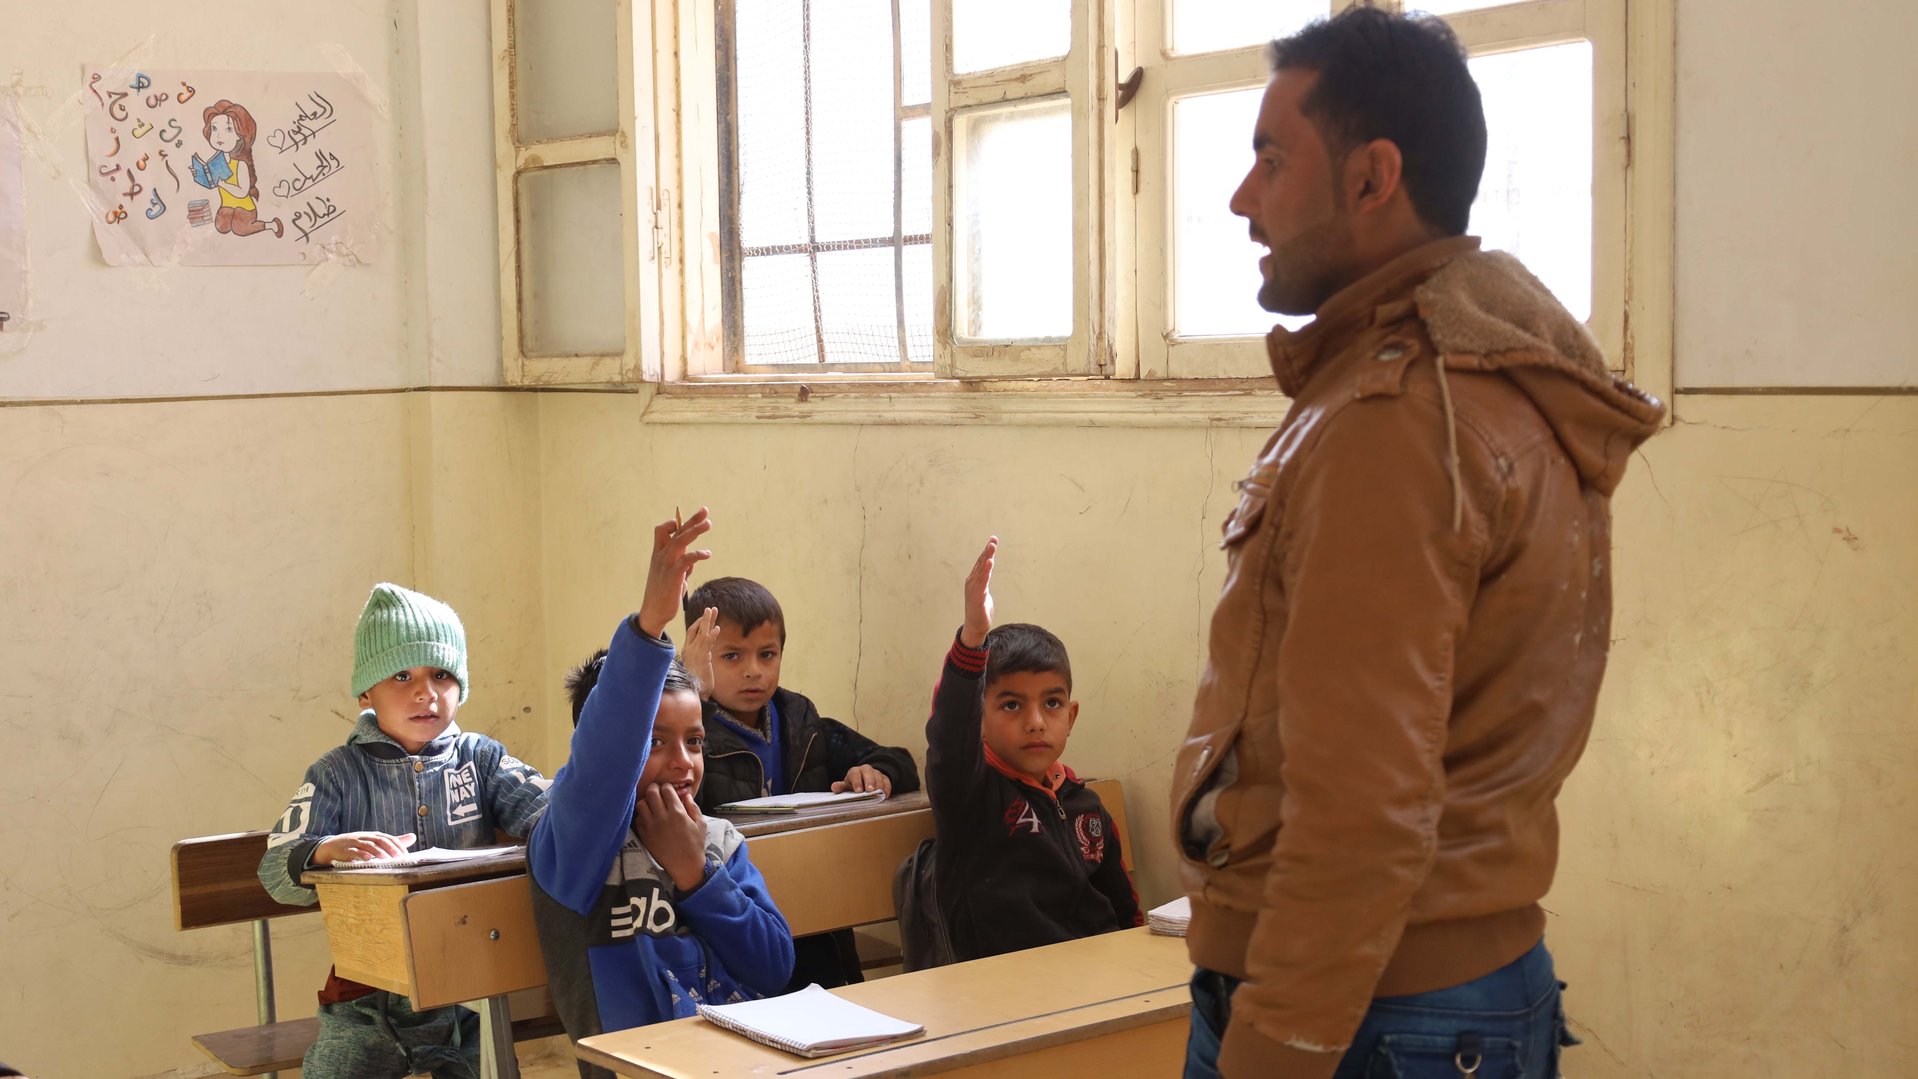 Muhammad, 9 years old, at school raising his hand in the class, part of War Child's Syria Response